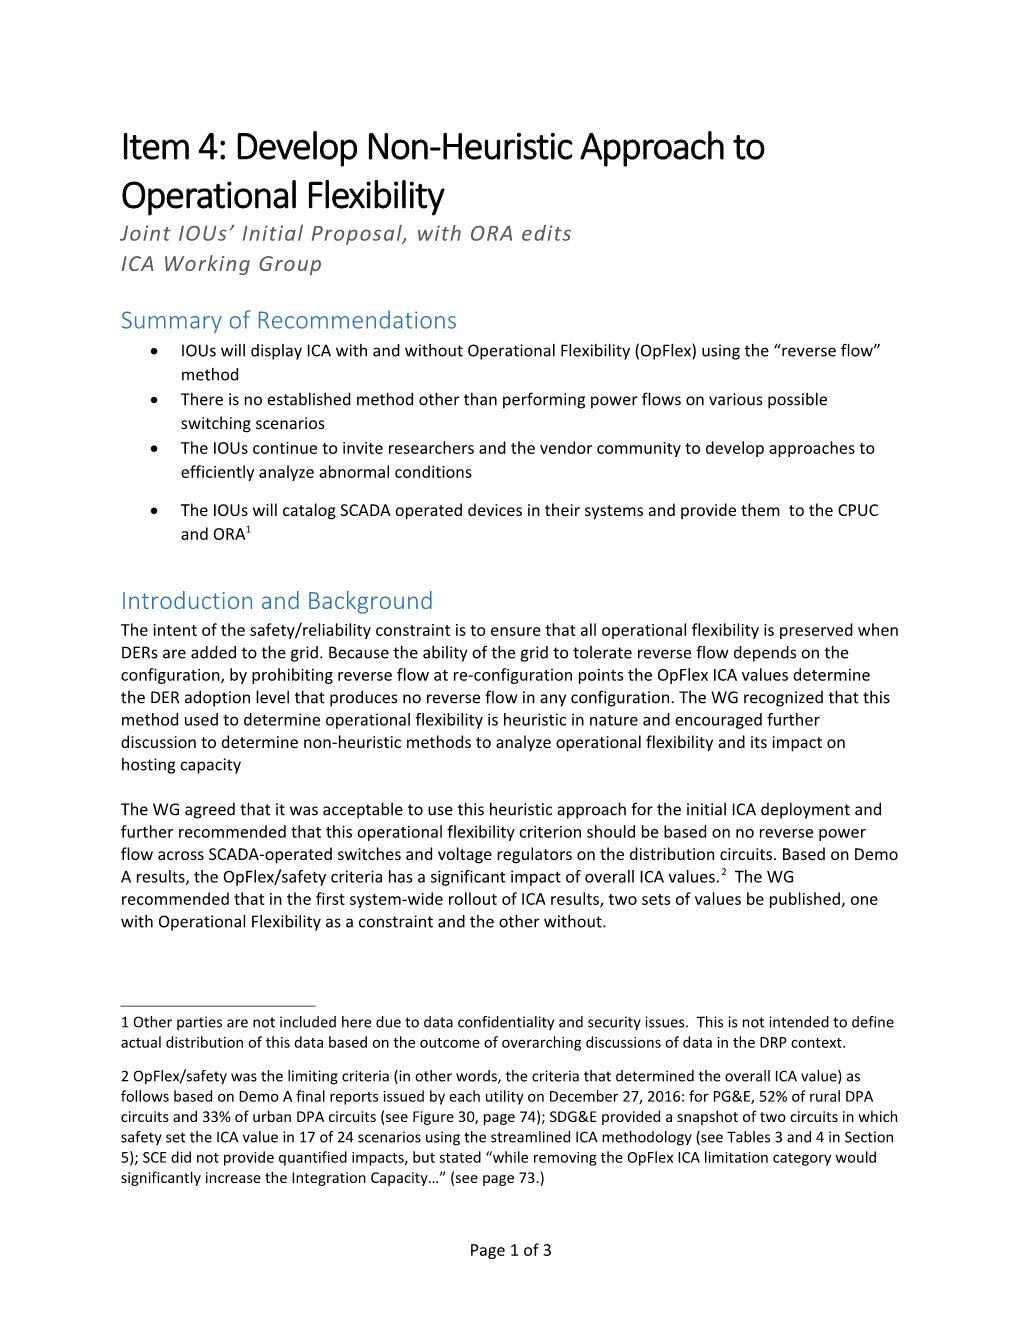 Item 4: Develop Non-Heuristic Approach to Operational Flexibility